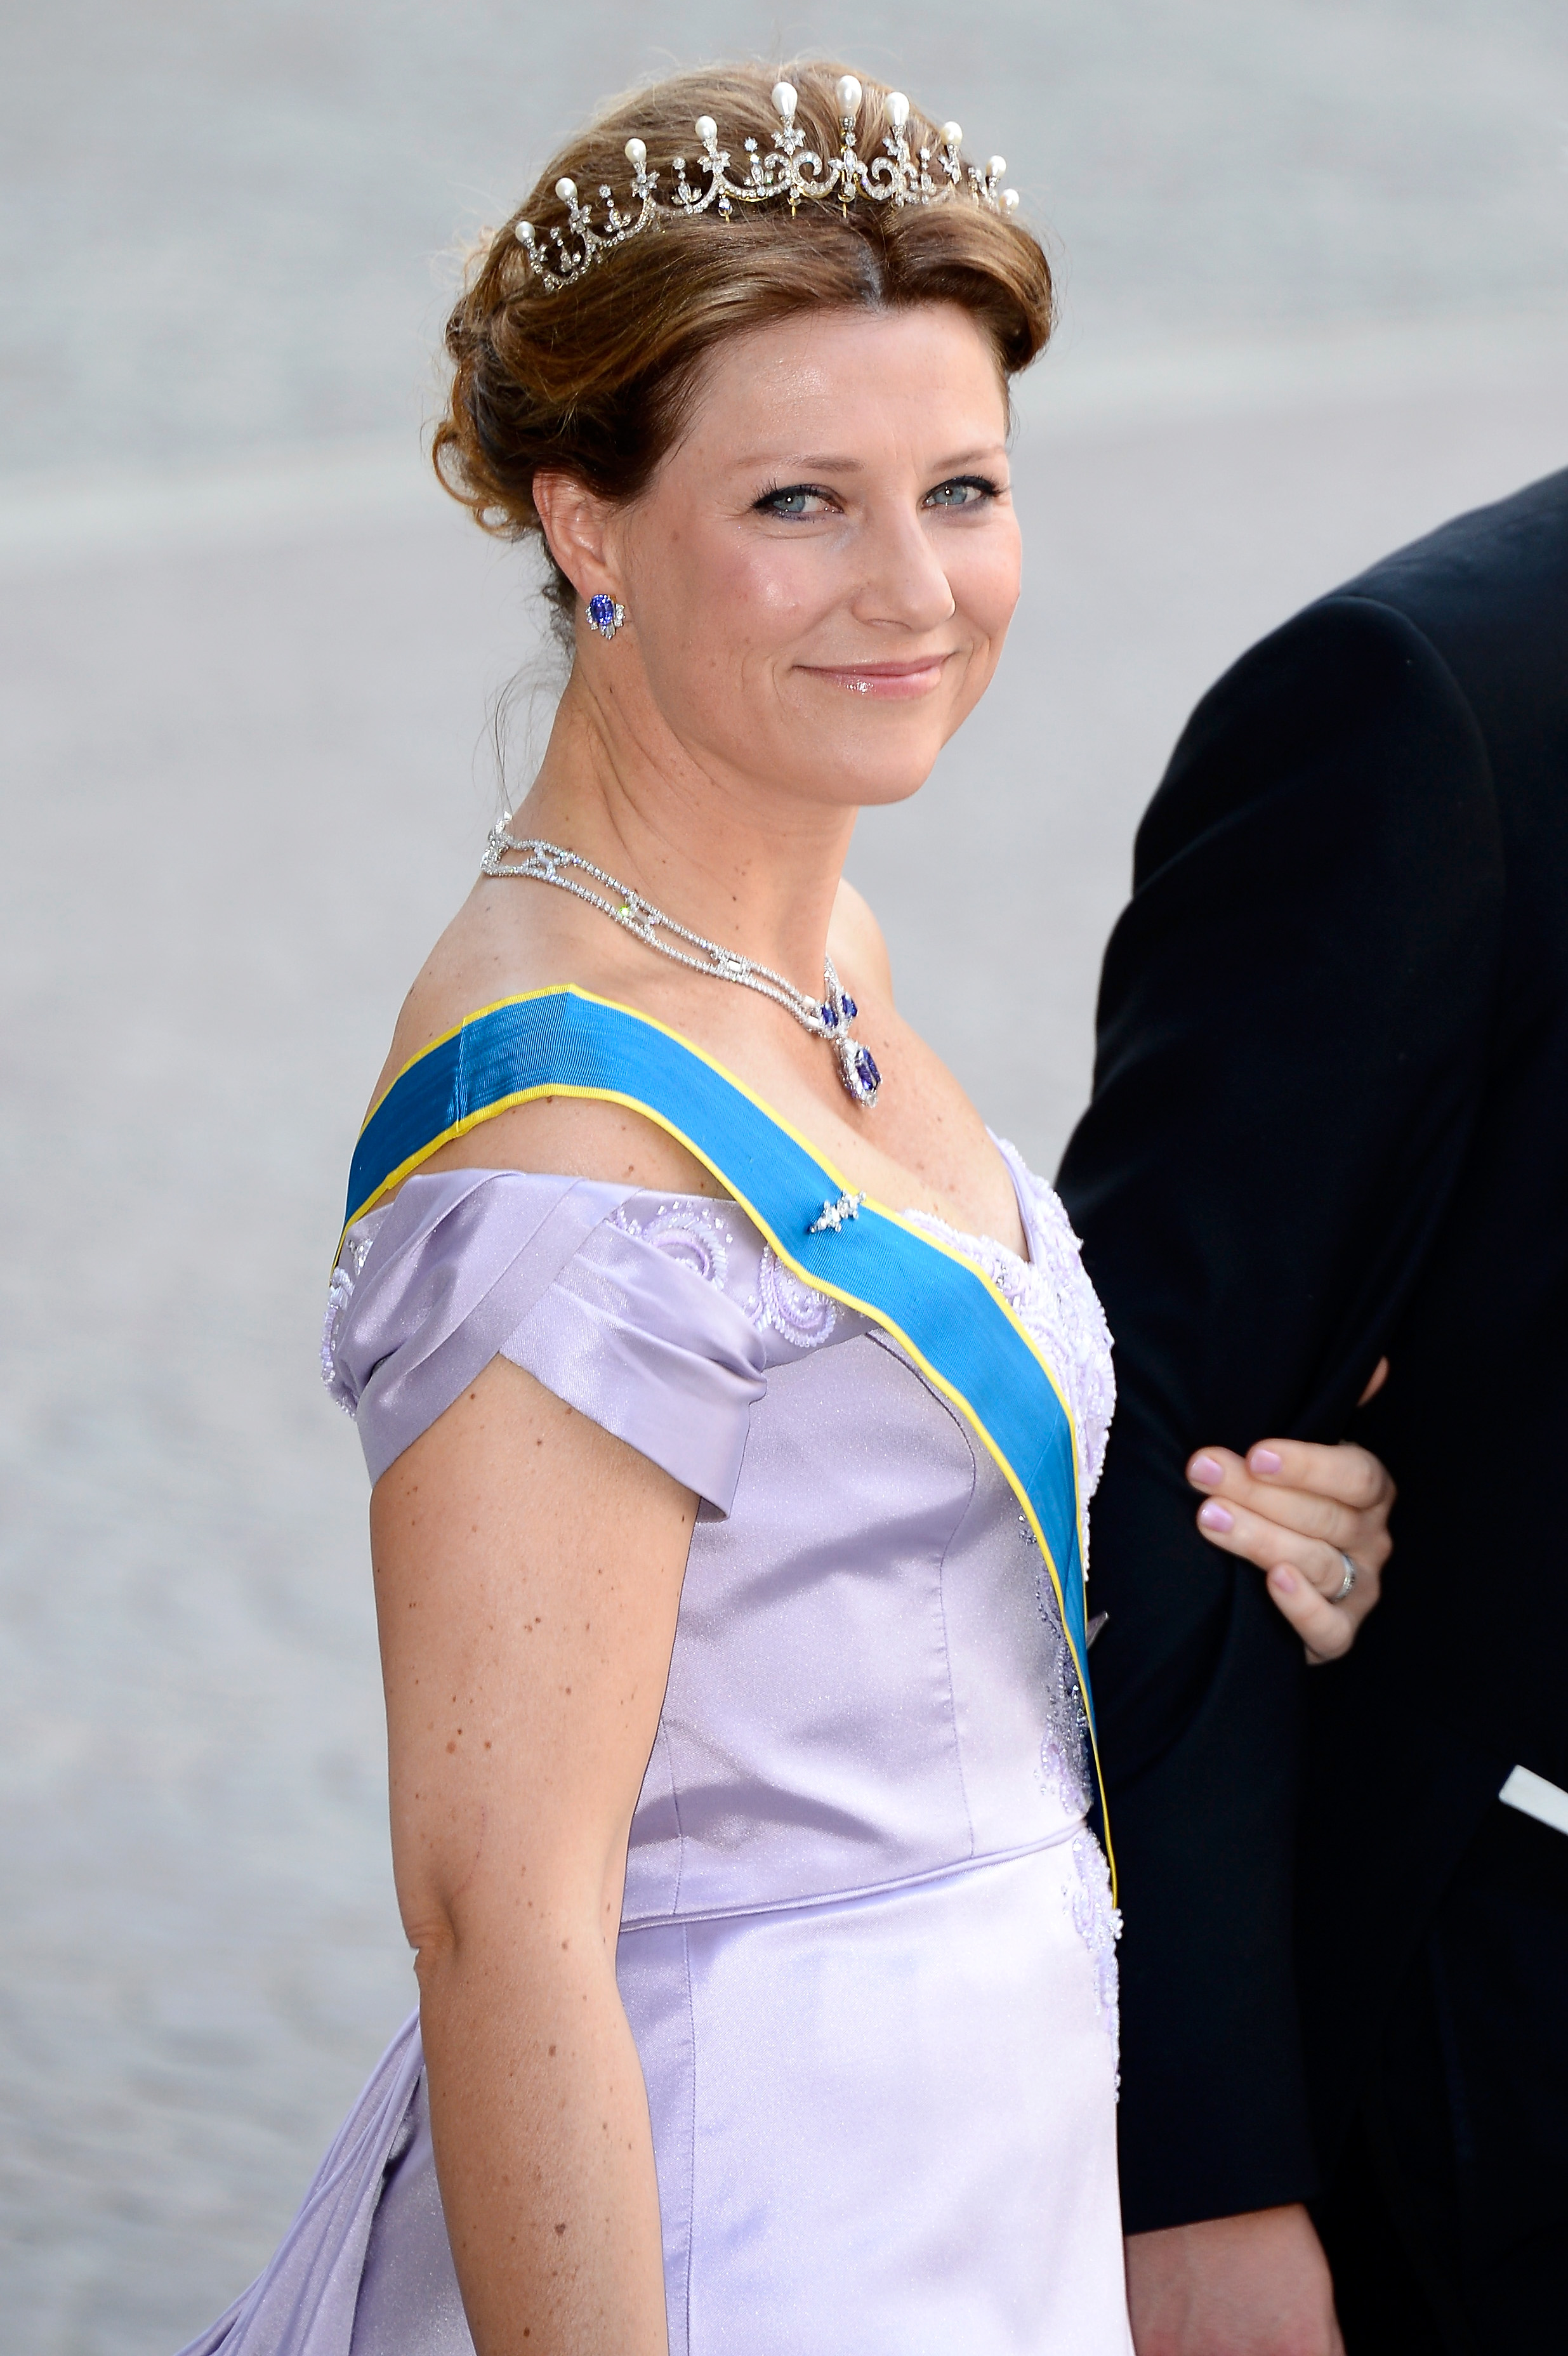 Princess Martha Louise of Norway wearing a gown and tiara at the wedding of Princess Madeleine of Sweden